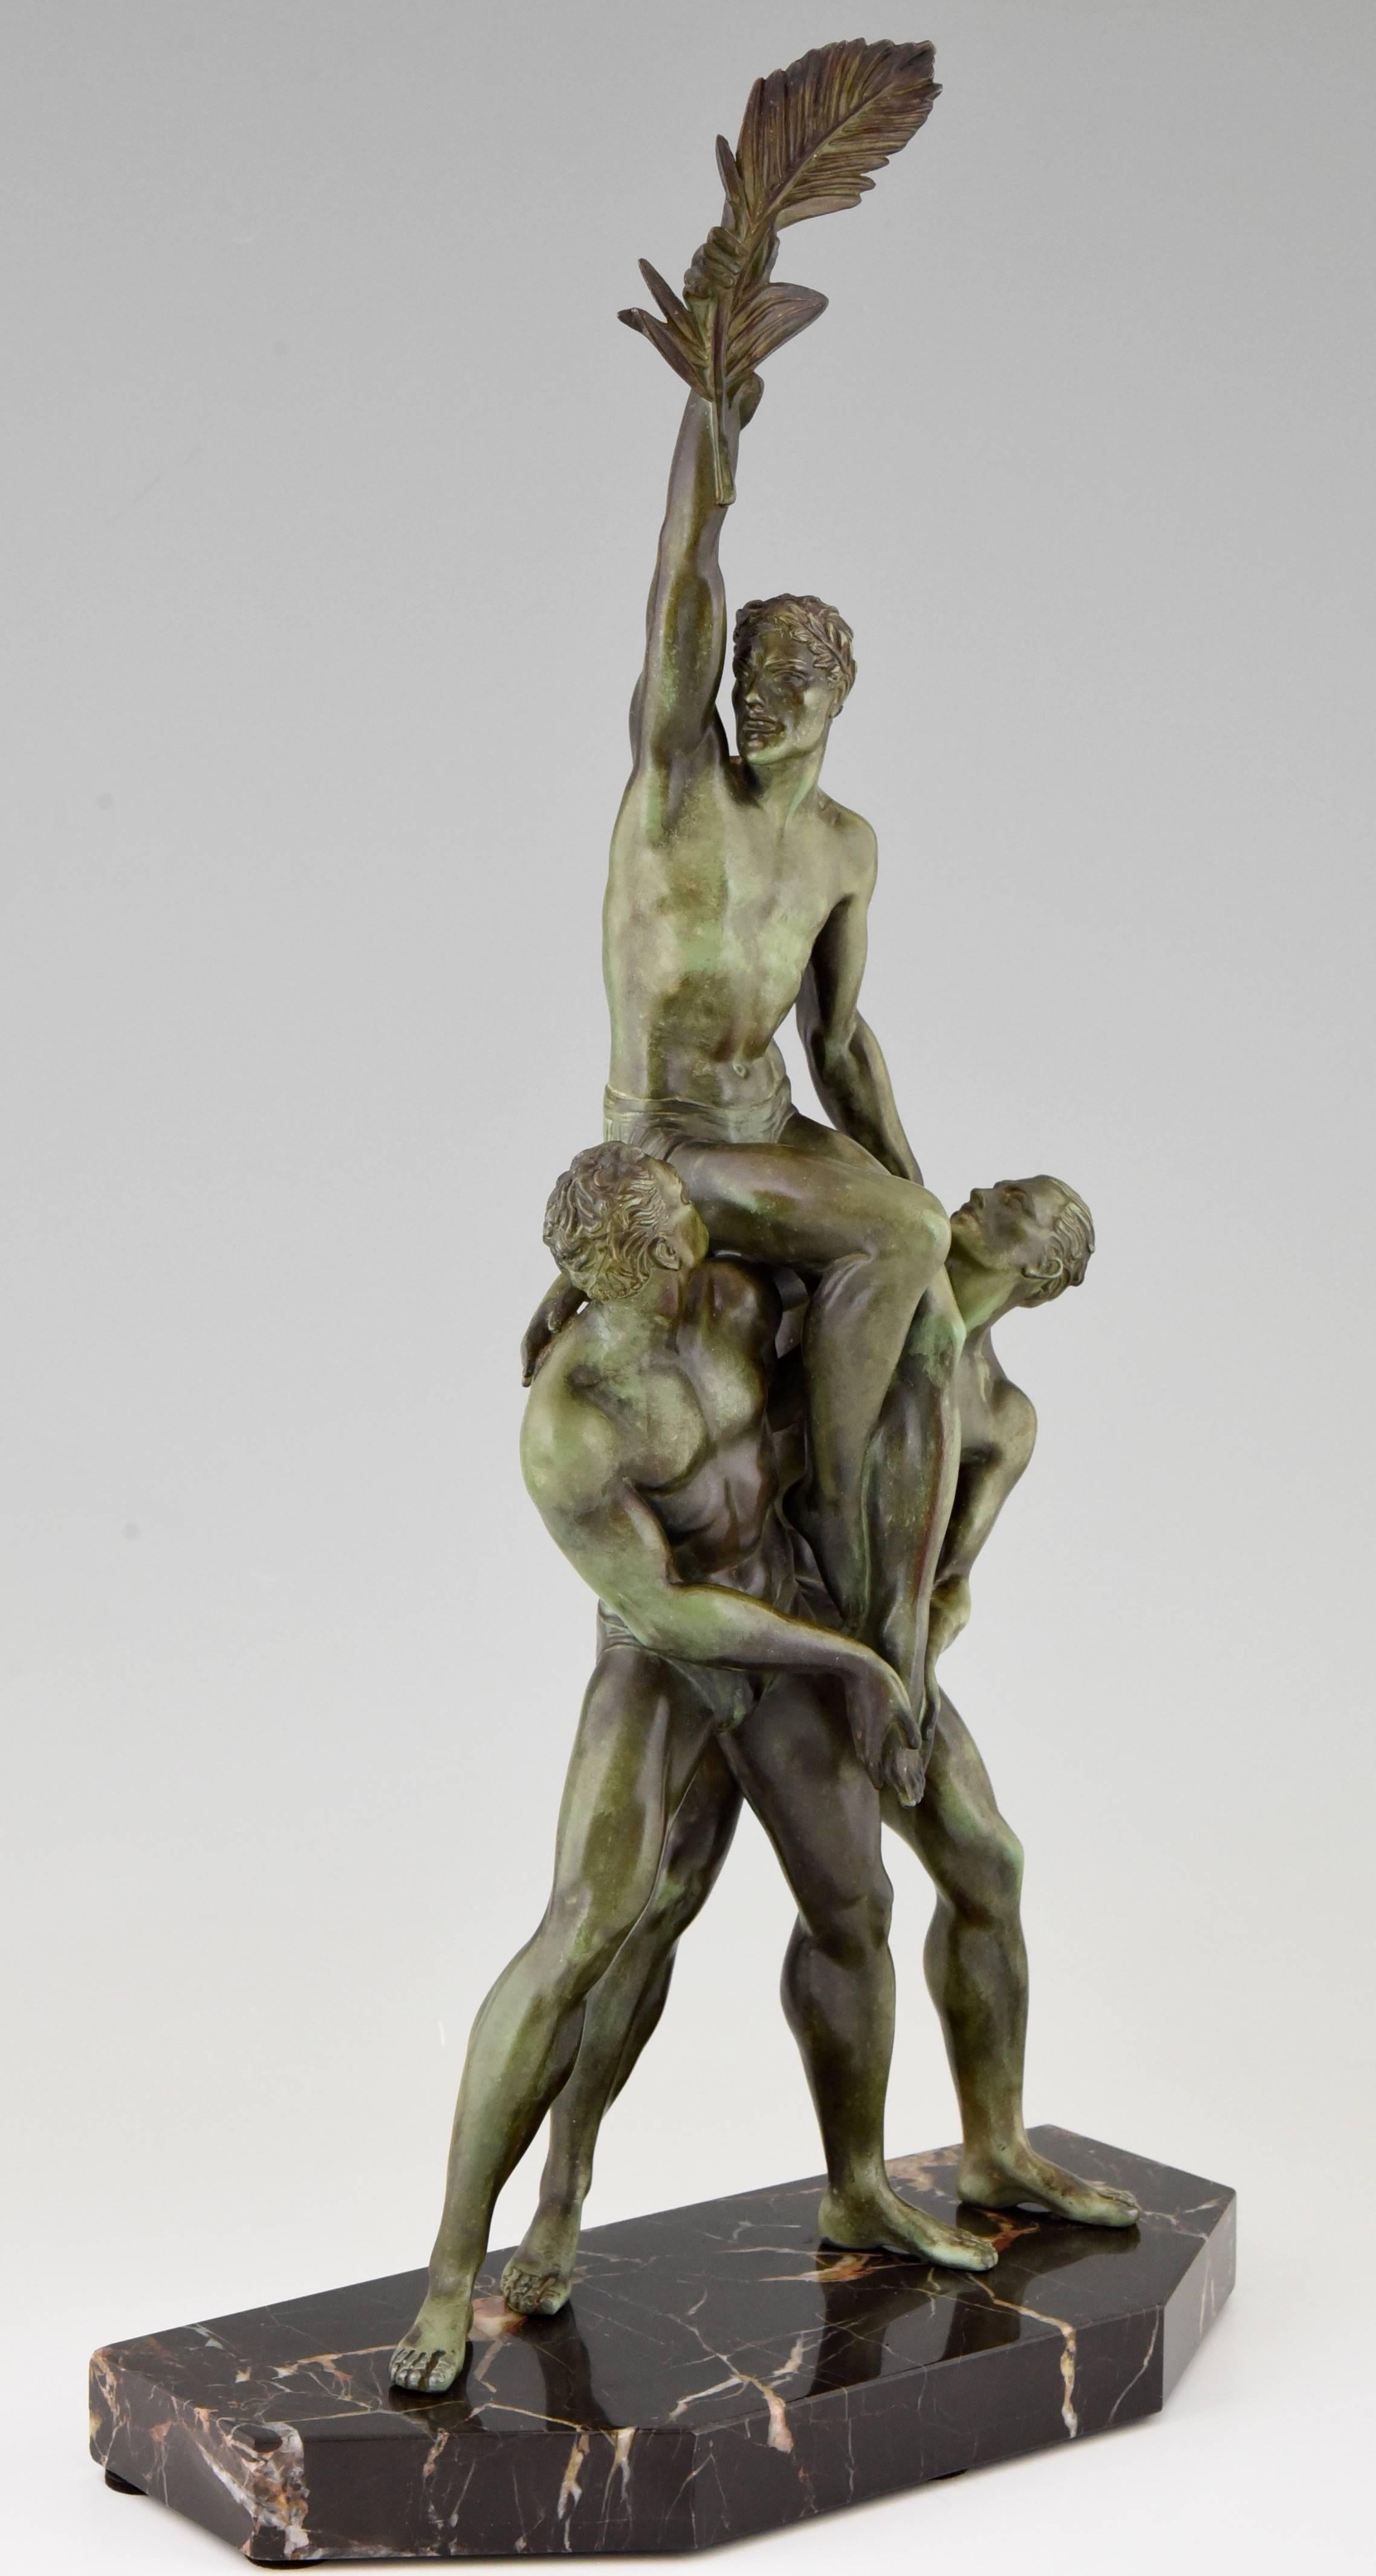 Typical Art Deco sculpture of three athletes by the well known French artist Pierre Le Faguays.

Artist / maker:
Pierre Le Faguays.
Signature / Marks:
P. Le Faguays. 
Style:
Art Deco.
Date:
1935.
Material:
Green patinated metal with